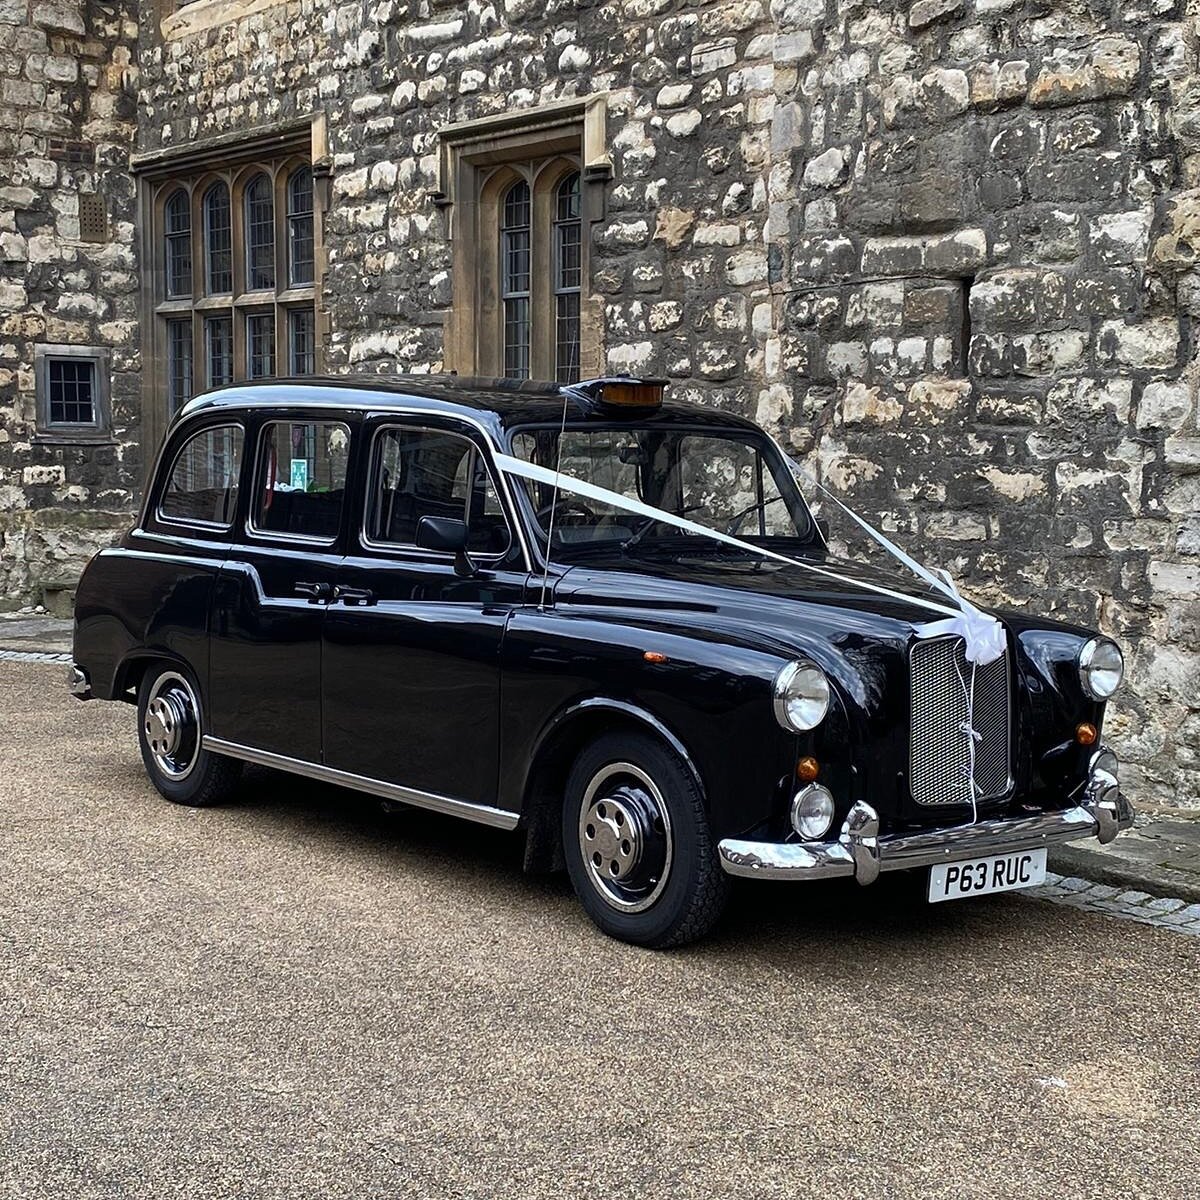 Our beautiful 90&rsquo;s black fairway out on wedding duty today, looking spectacular ✨

💍 Wedding Transport
🎬 Filming Hire
✈️ Airport Transfers
📢 Promotions 
🚕 Taxi Advertising
🎥 Studio Tours
.
.
For information or enquires please contact us vi